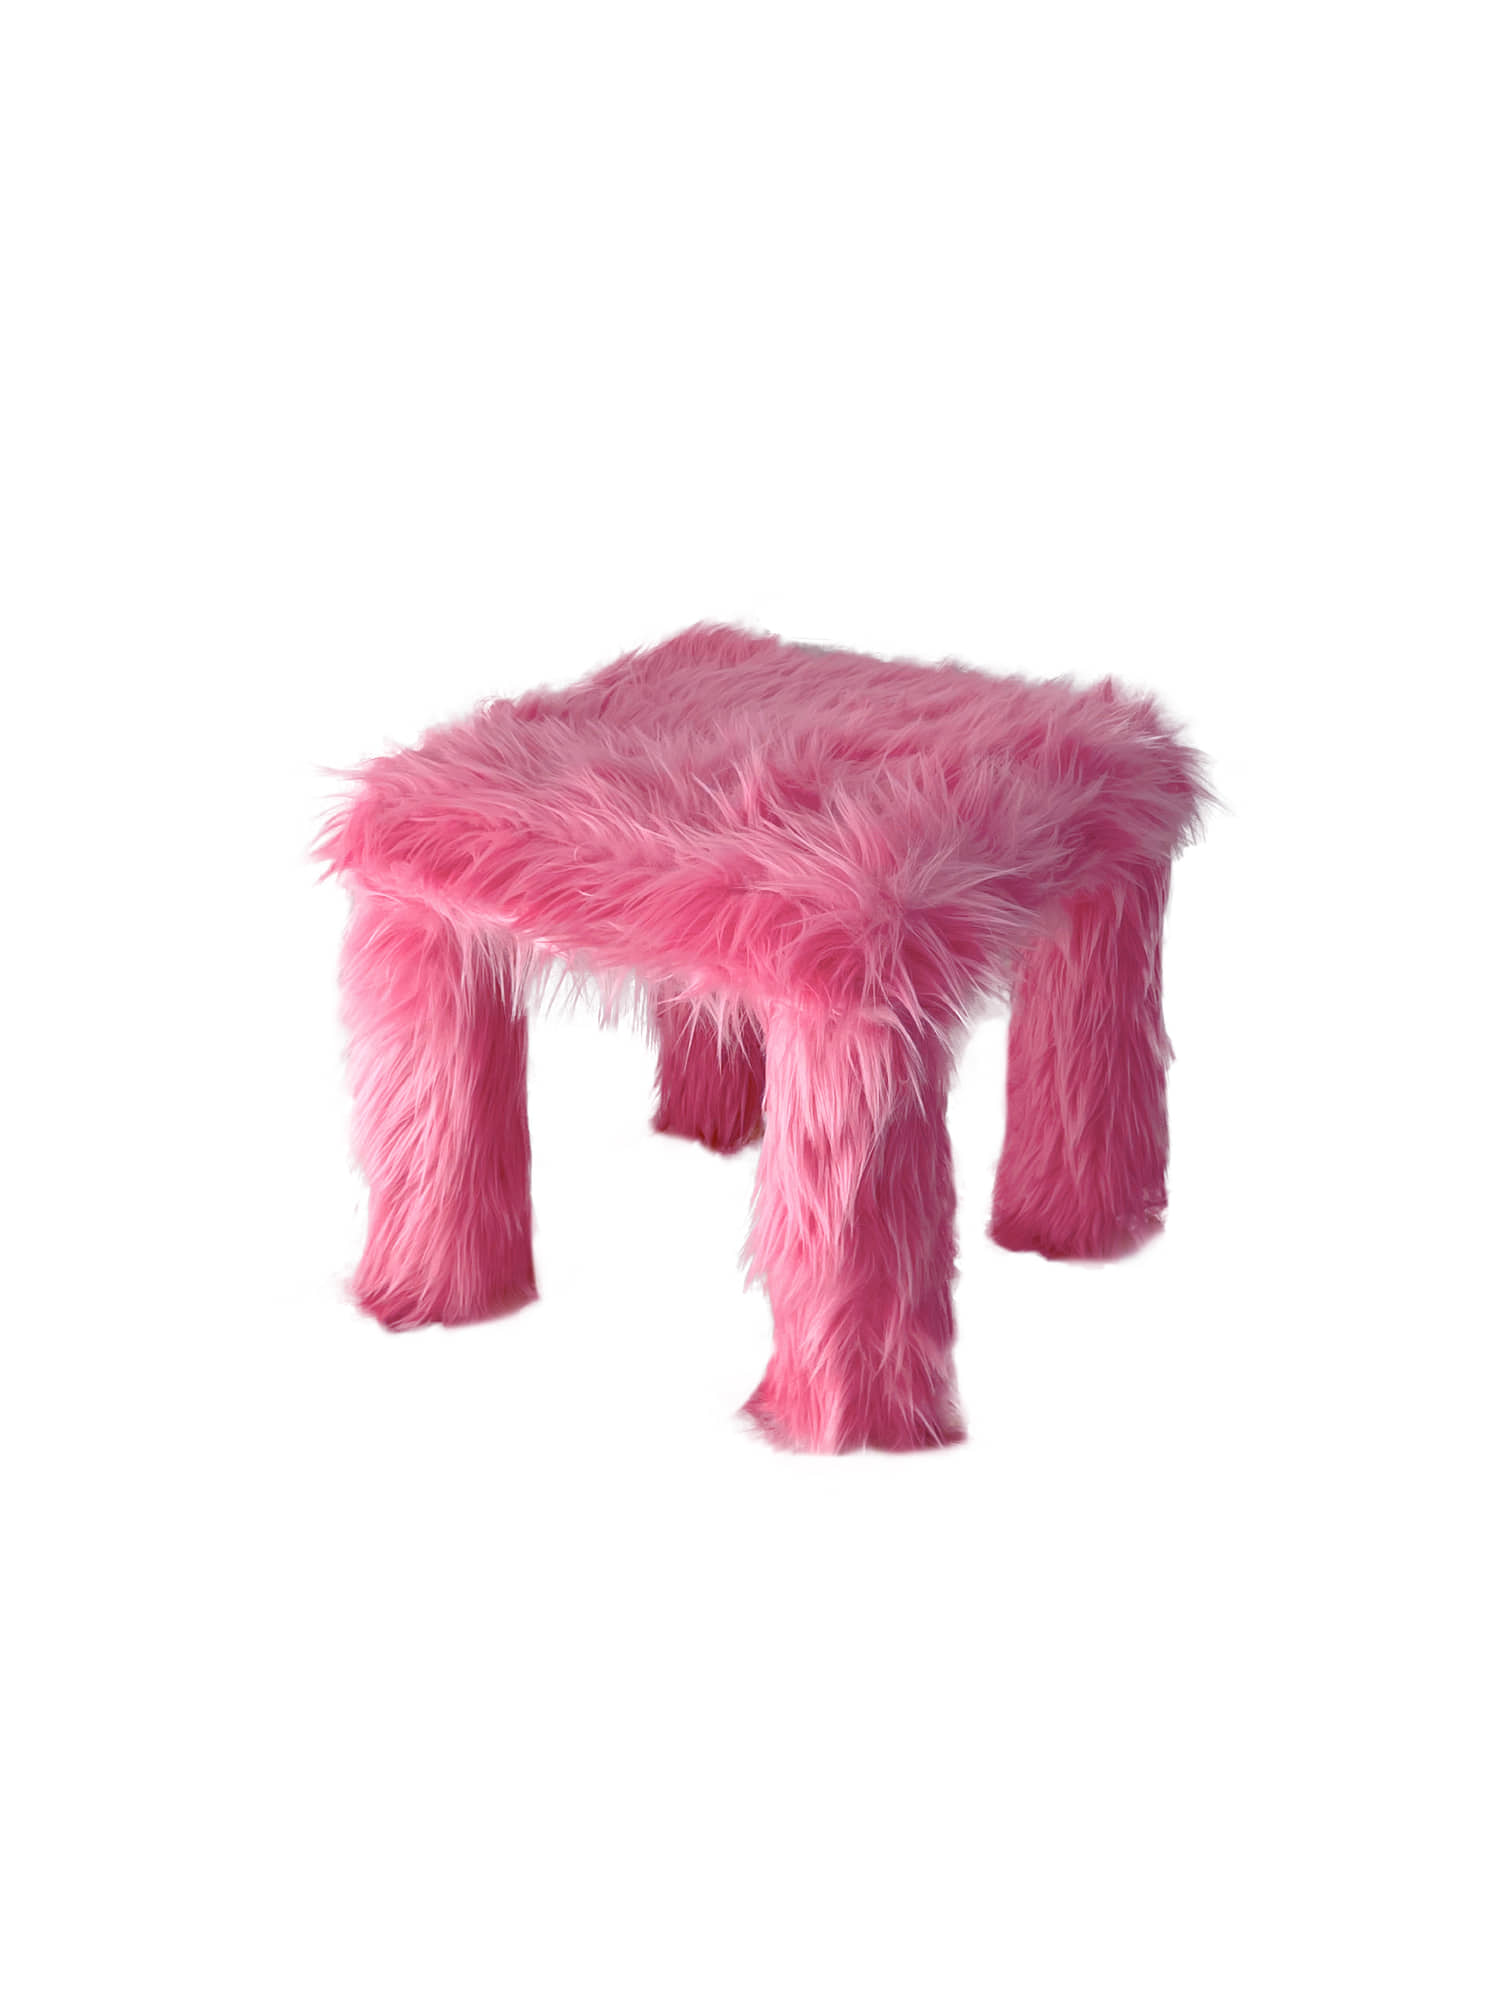 Furry Table - Pink